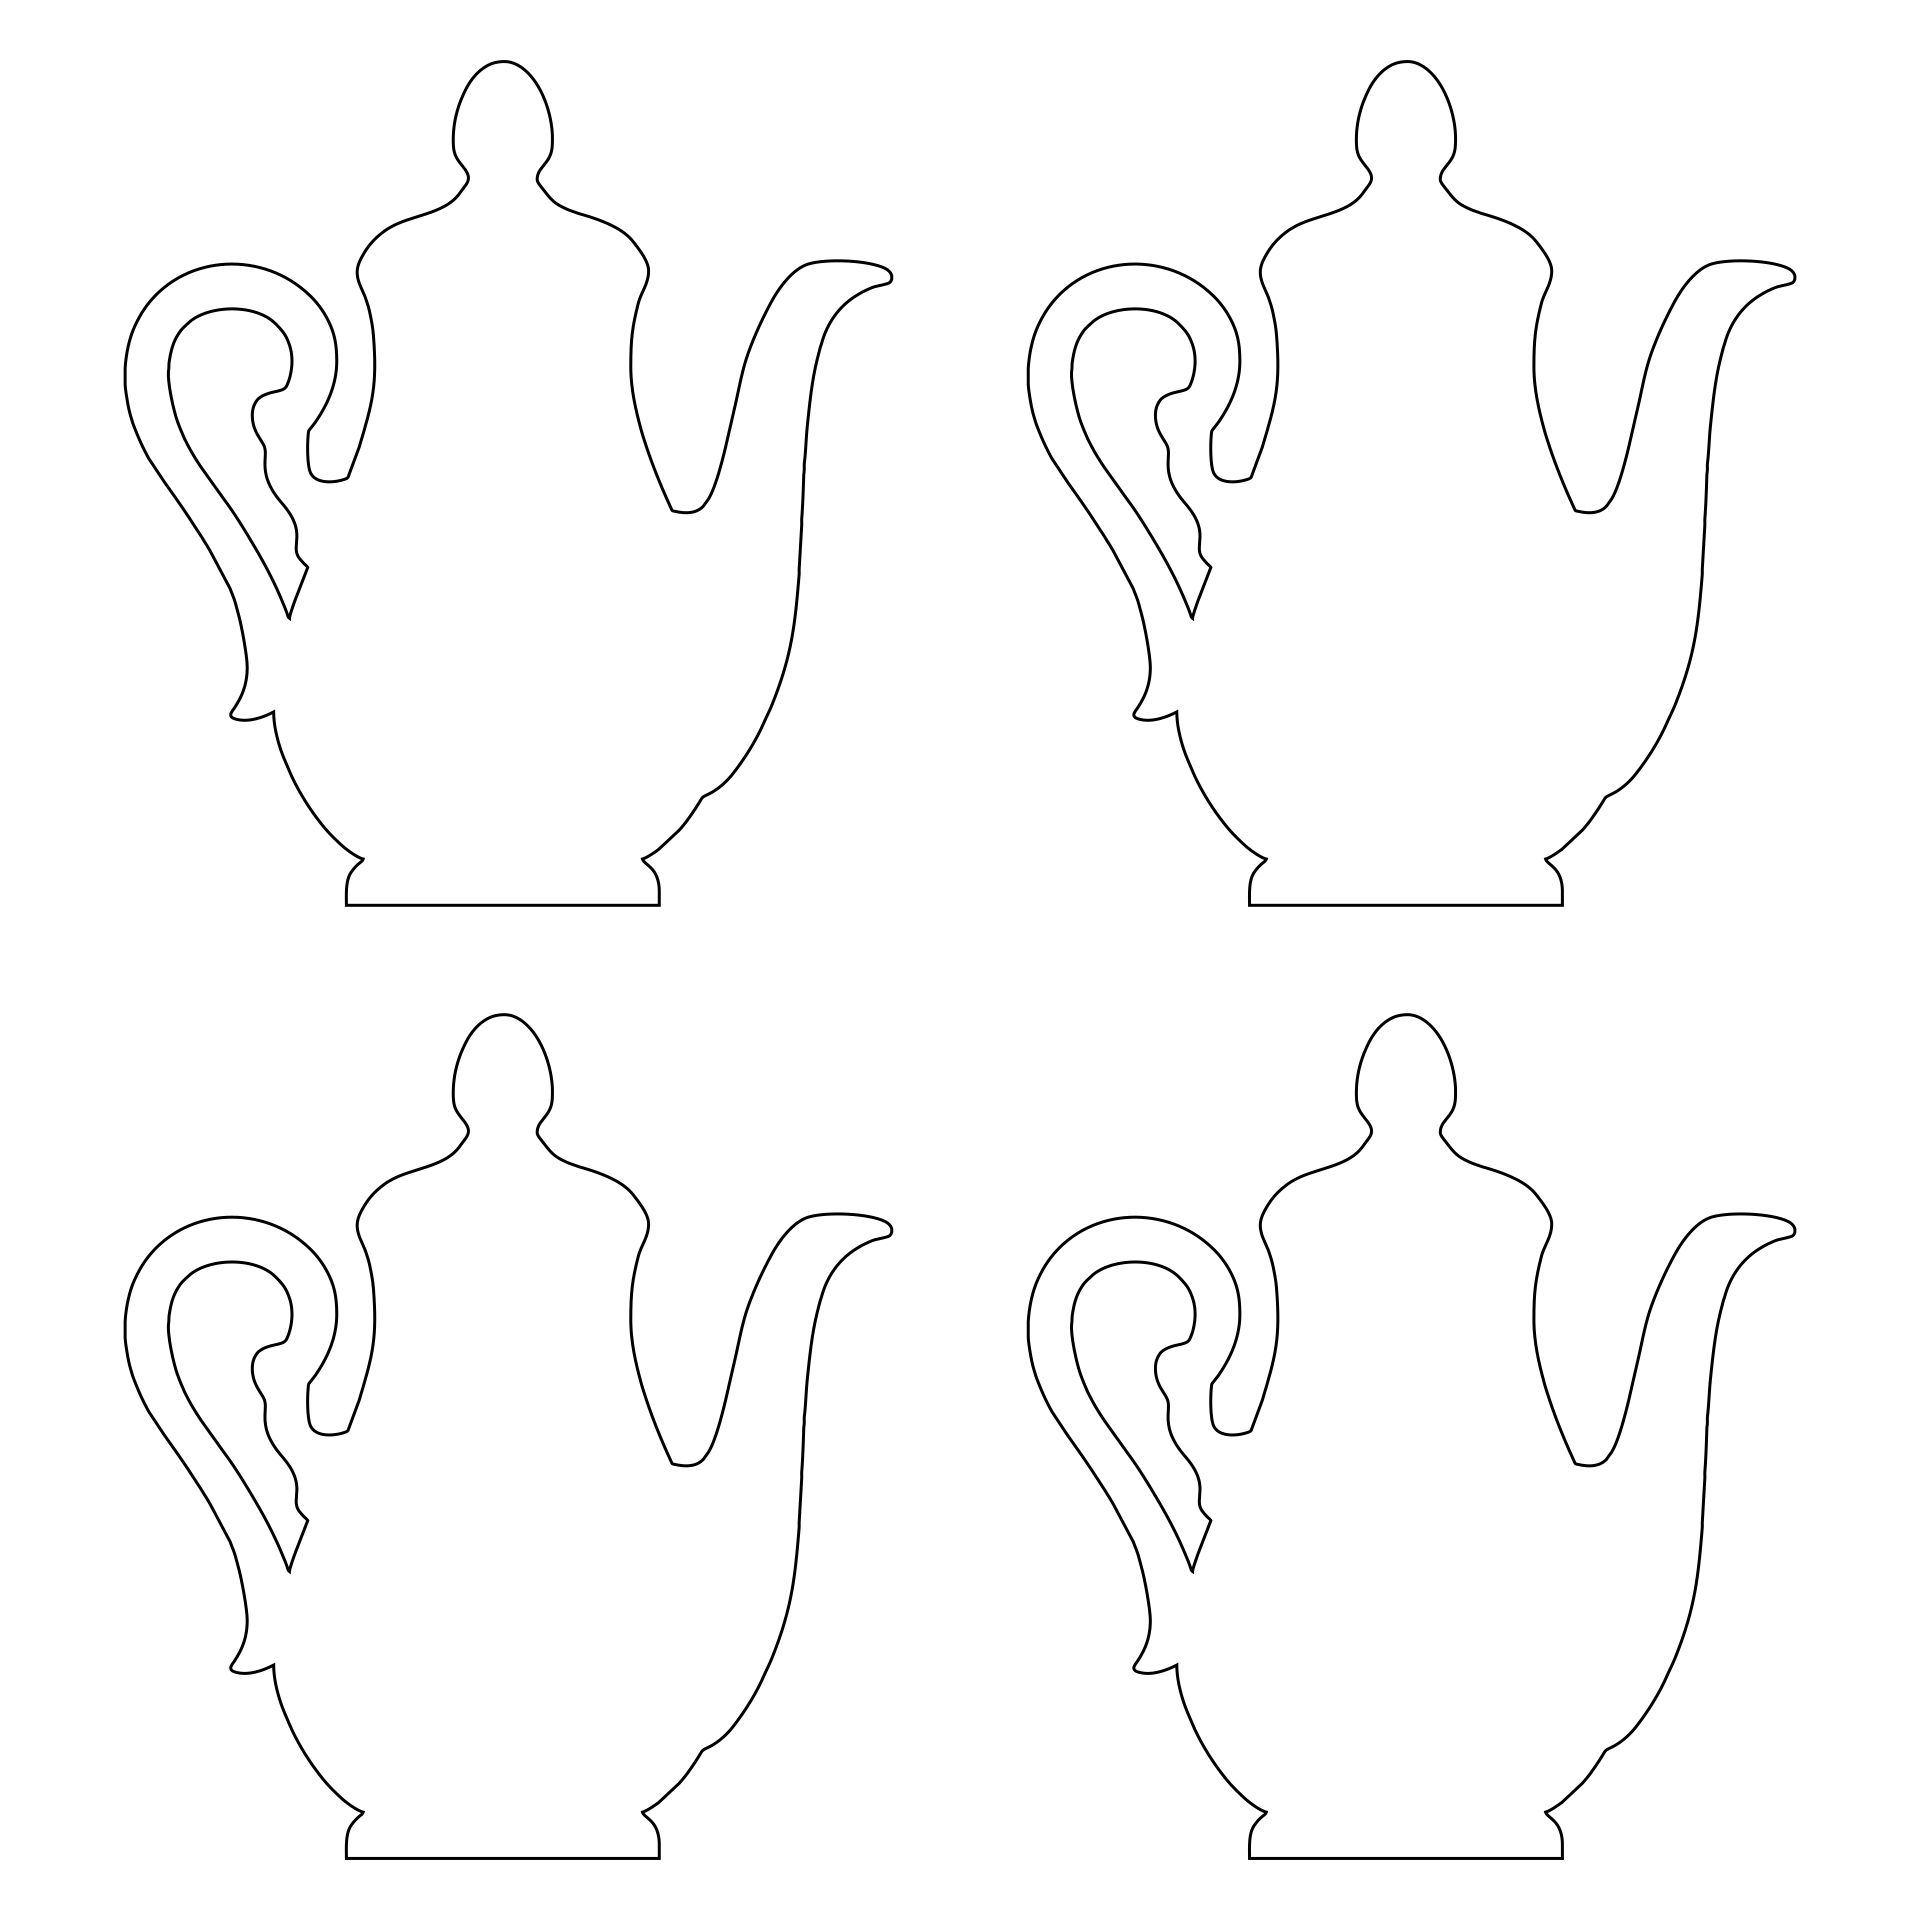 6 Best Images of Printable Tea Pot Teapot Coloring Page, Free